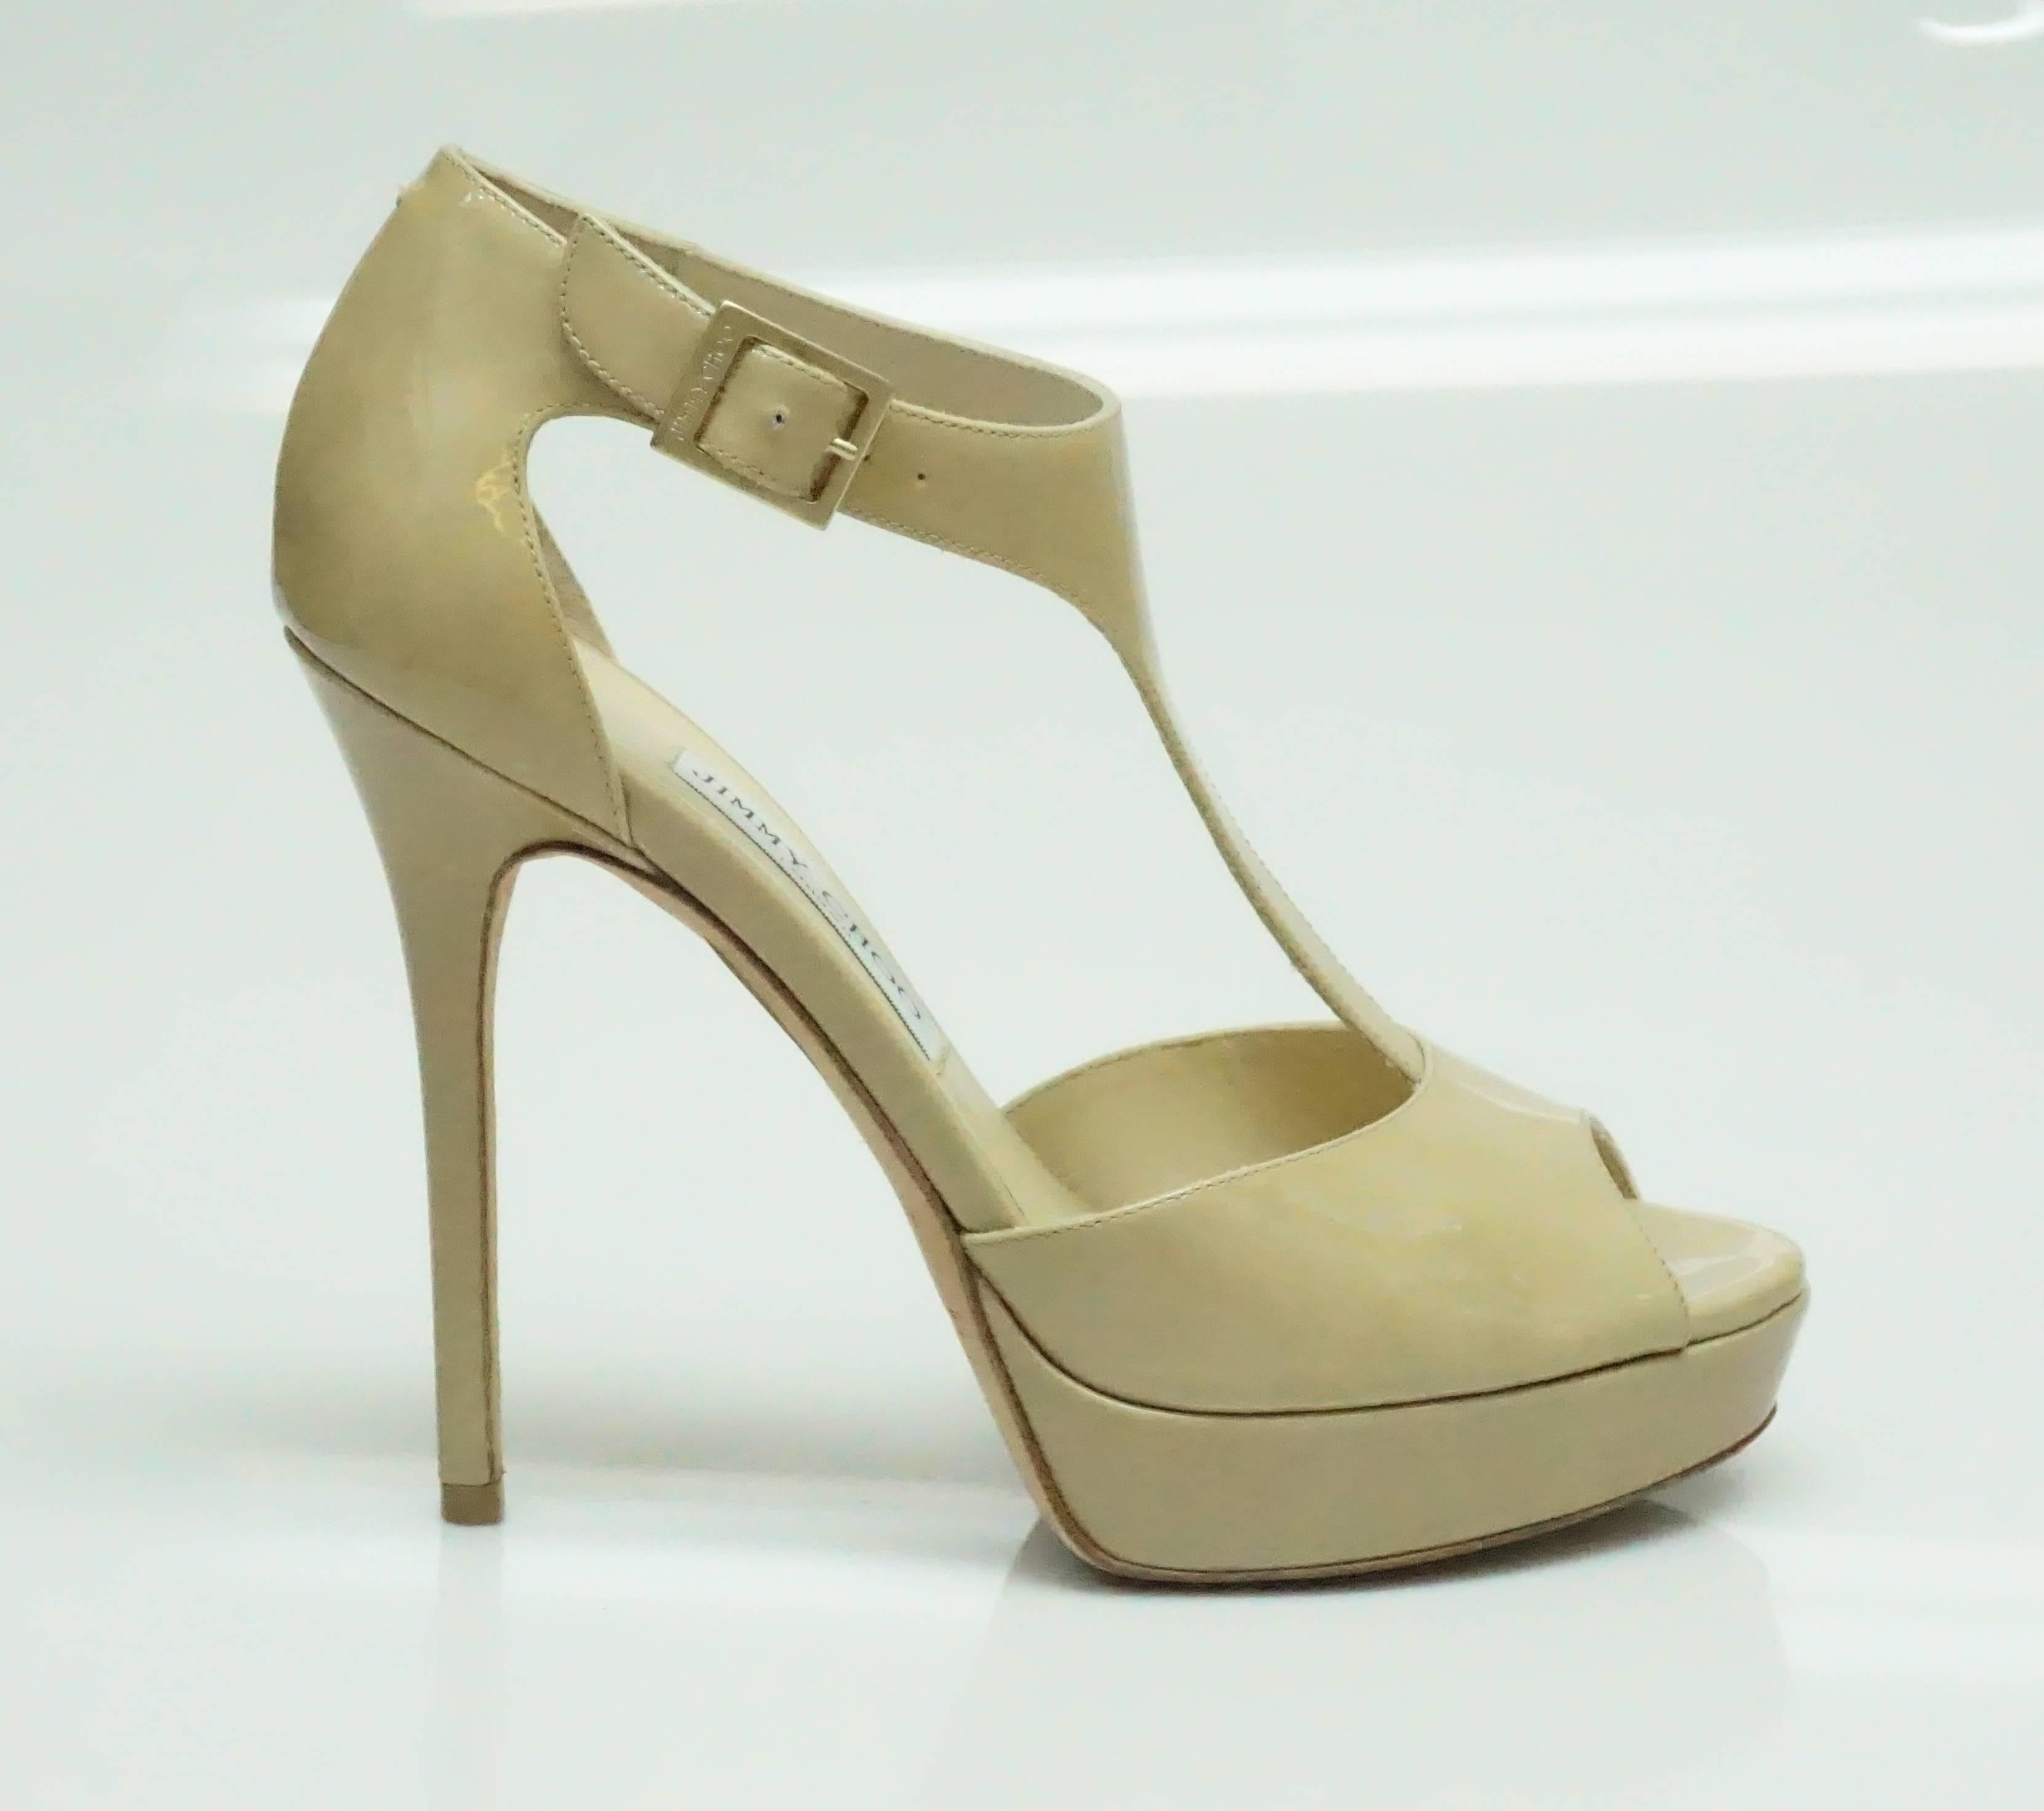 Jimmy Choo Nude Patent Platform Sandal - 38.5  These classic heels are in good condition. They have a bit of wear in the sole of the shoe and some discoloration around the toe of the shoe. The heel has an ankle strap that attaches to the front of